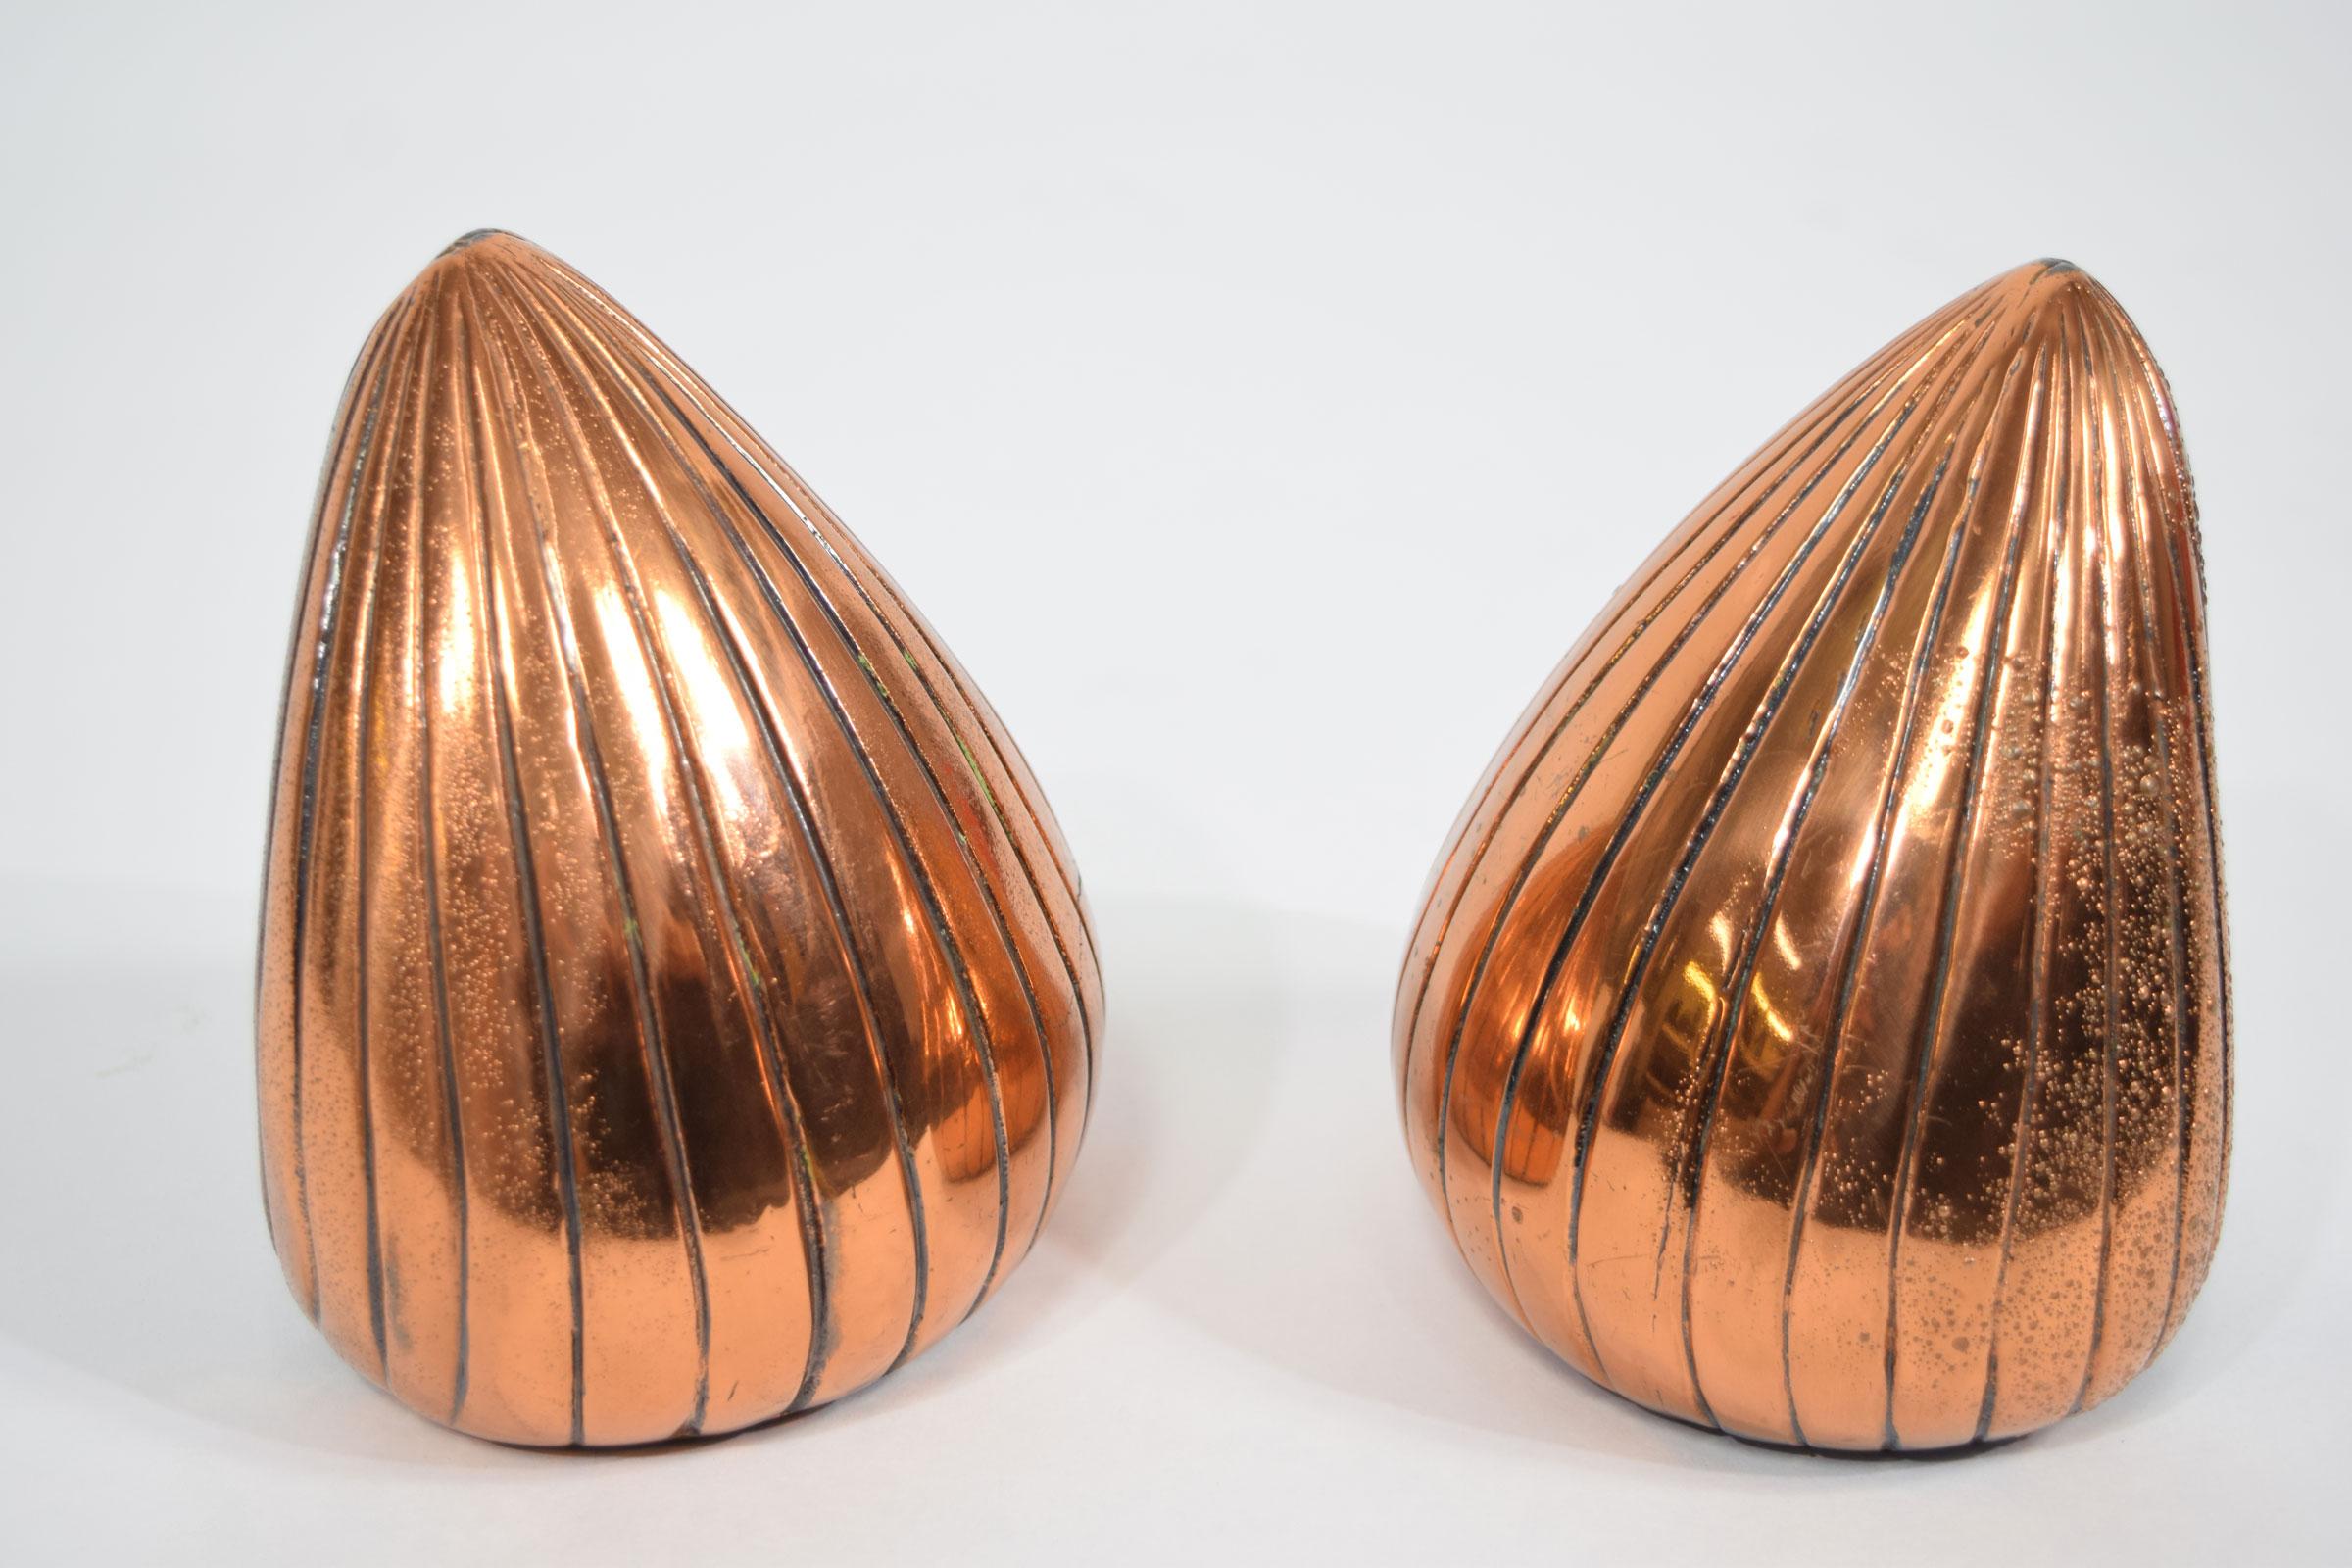 Heavy bookends by Ben Seibel in a copper finish.